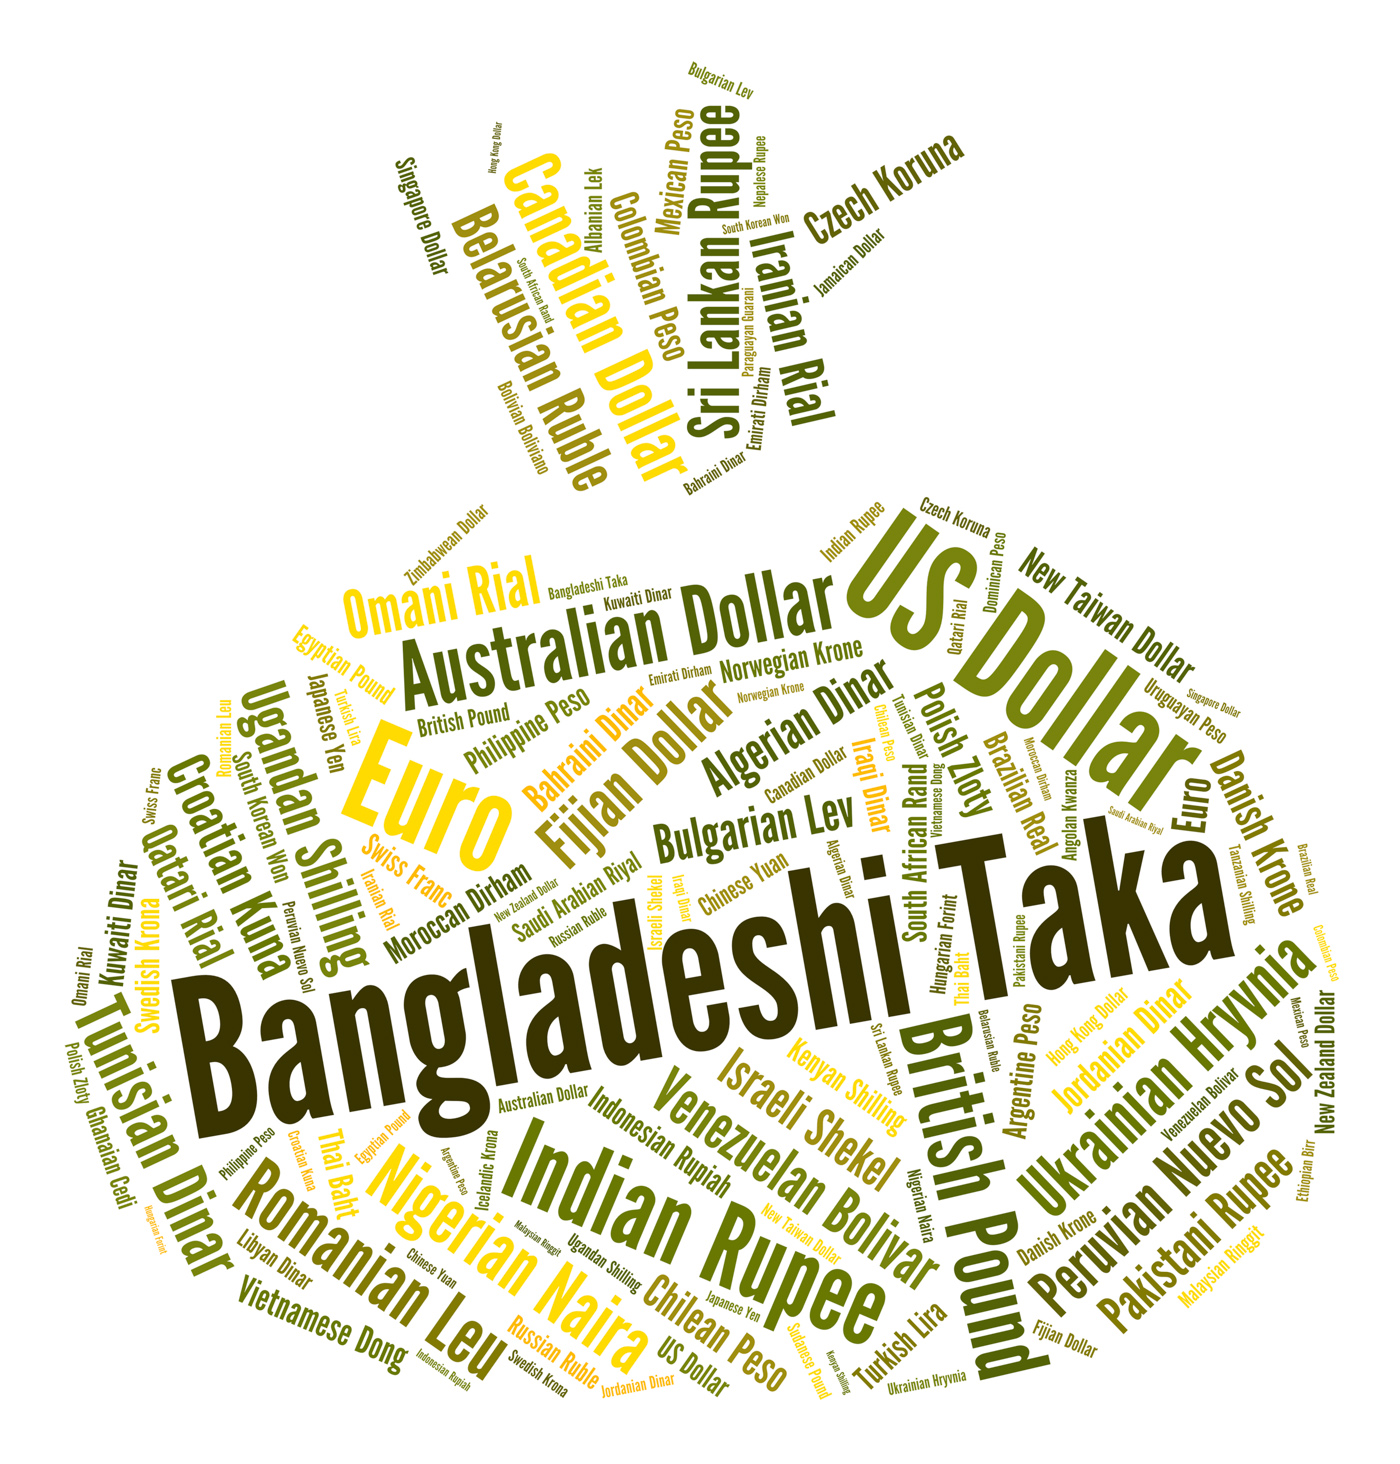 Bangladeshi taka represents foreign currency and currencies photo